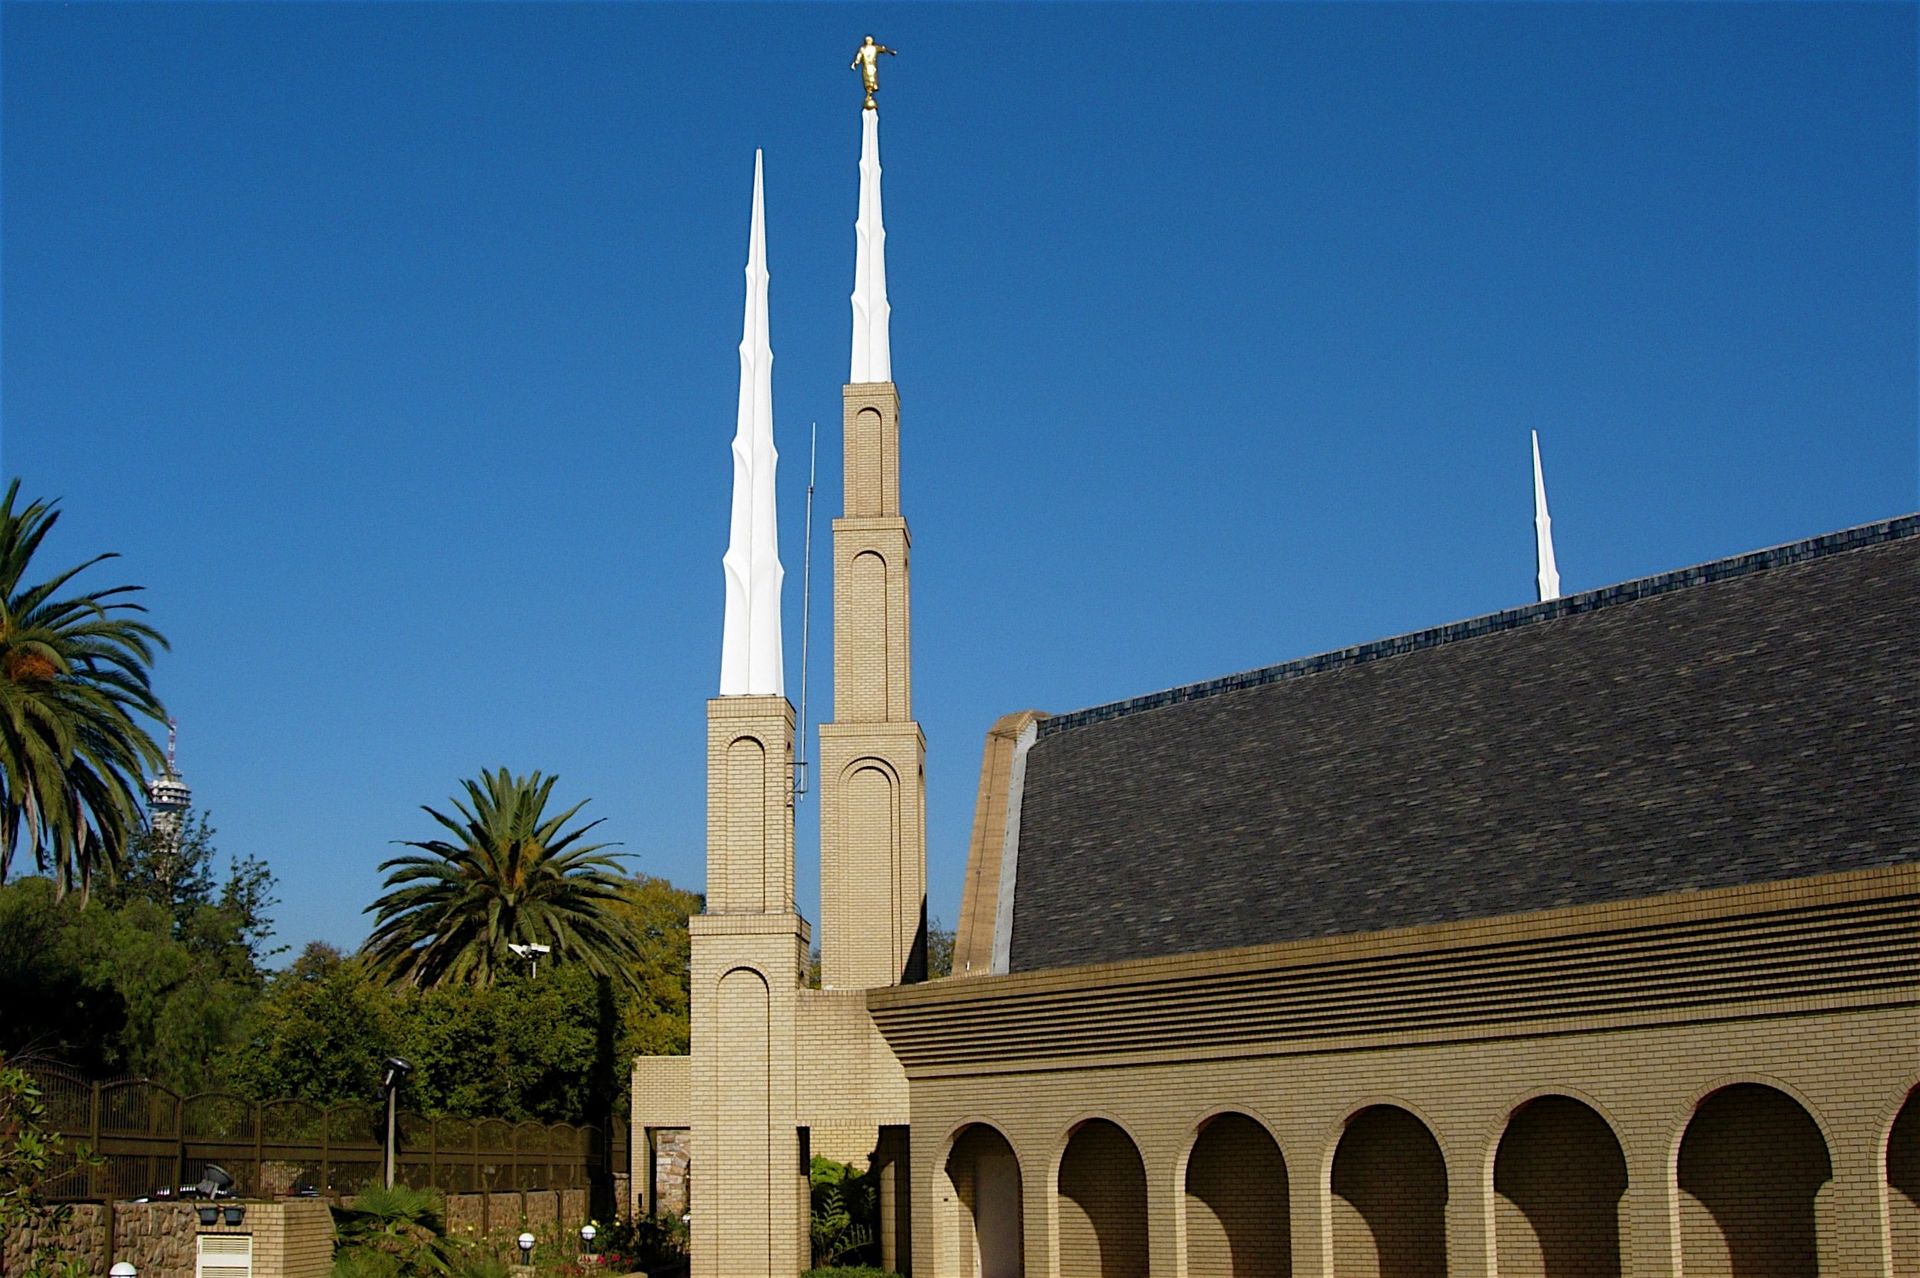 The Johannesburg South Africa Temple spires, including a side view of the temple and scenery.